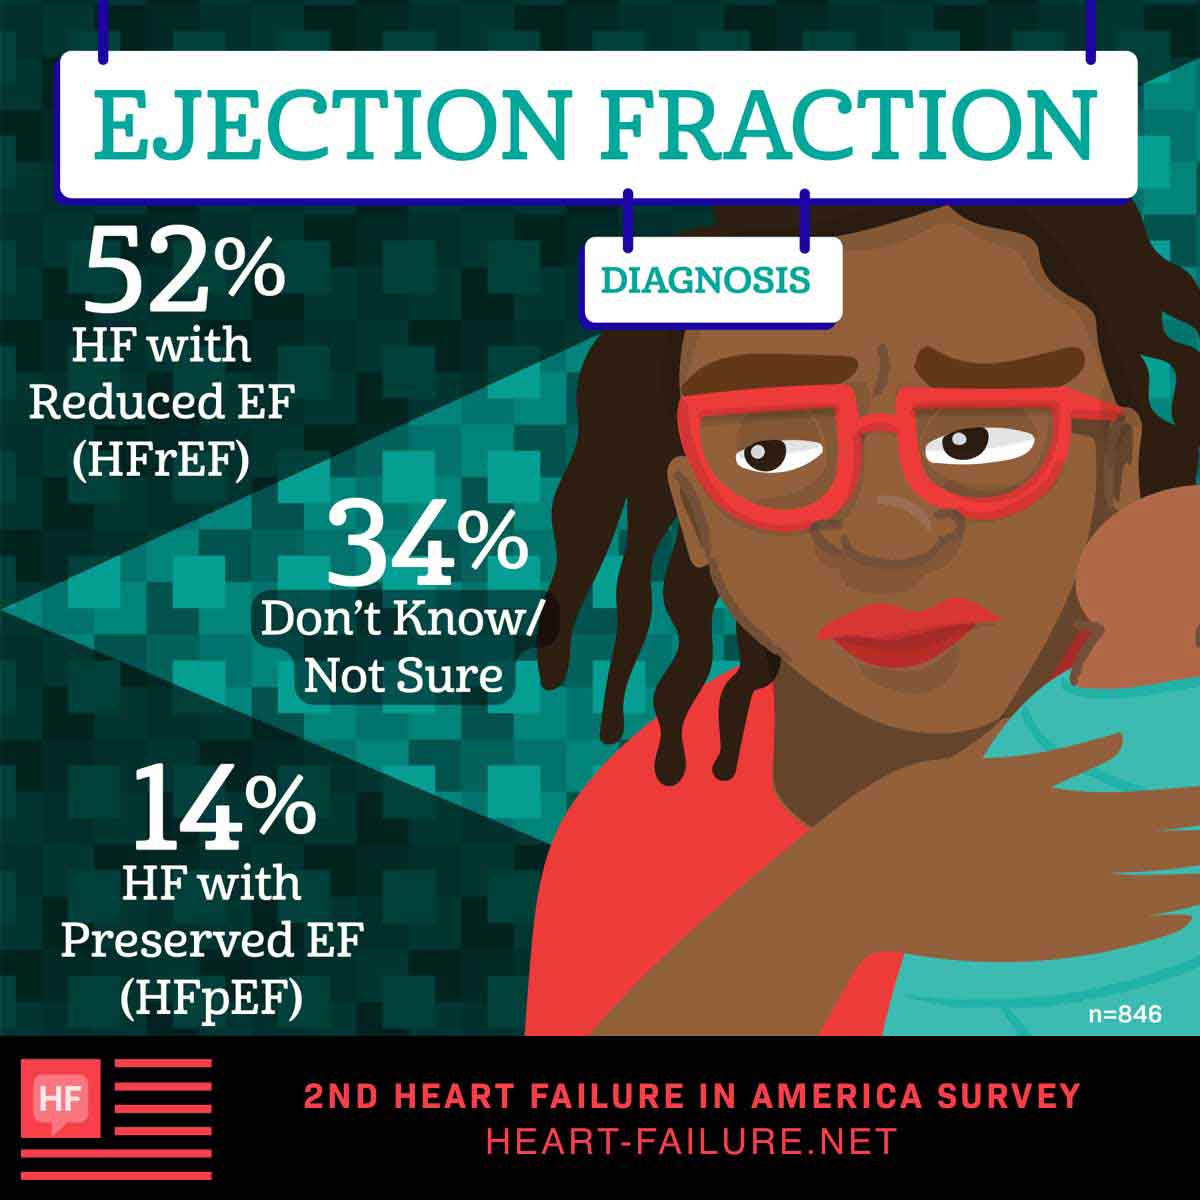 Ejection fraction diagnosis: Heart failure with reduced ejection fraction (HFrEF): 52%, I don’t know/I’m not sure: 34%, Heart failure with preserved ejection fraction (HFpEF): 14% 